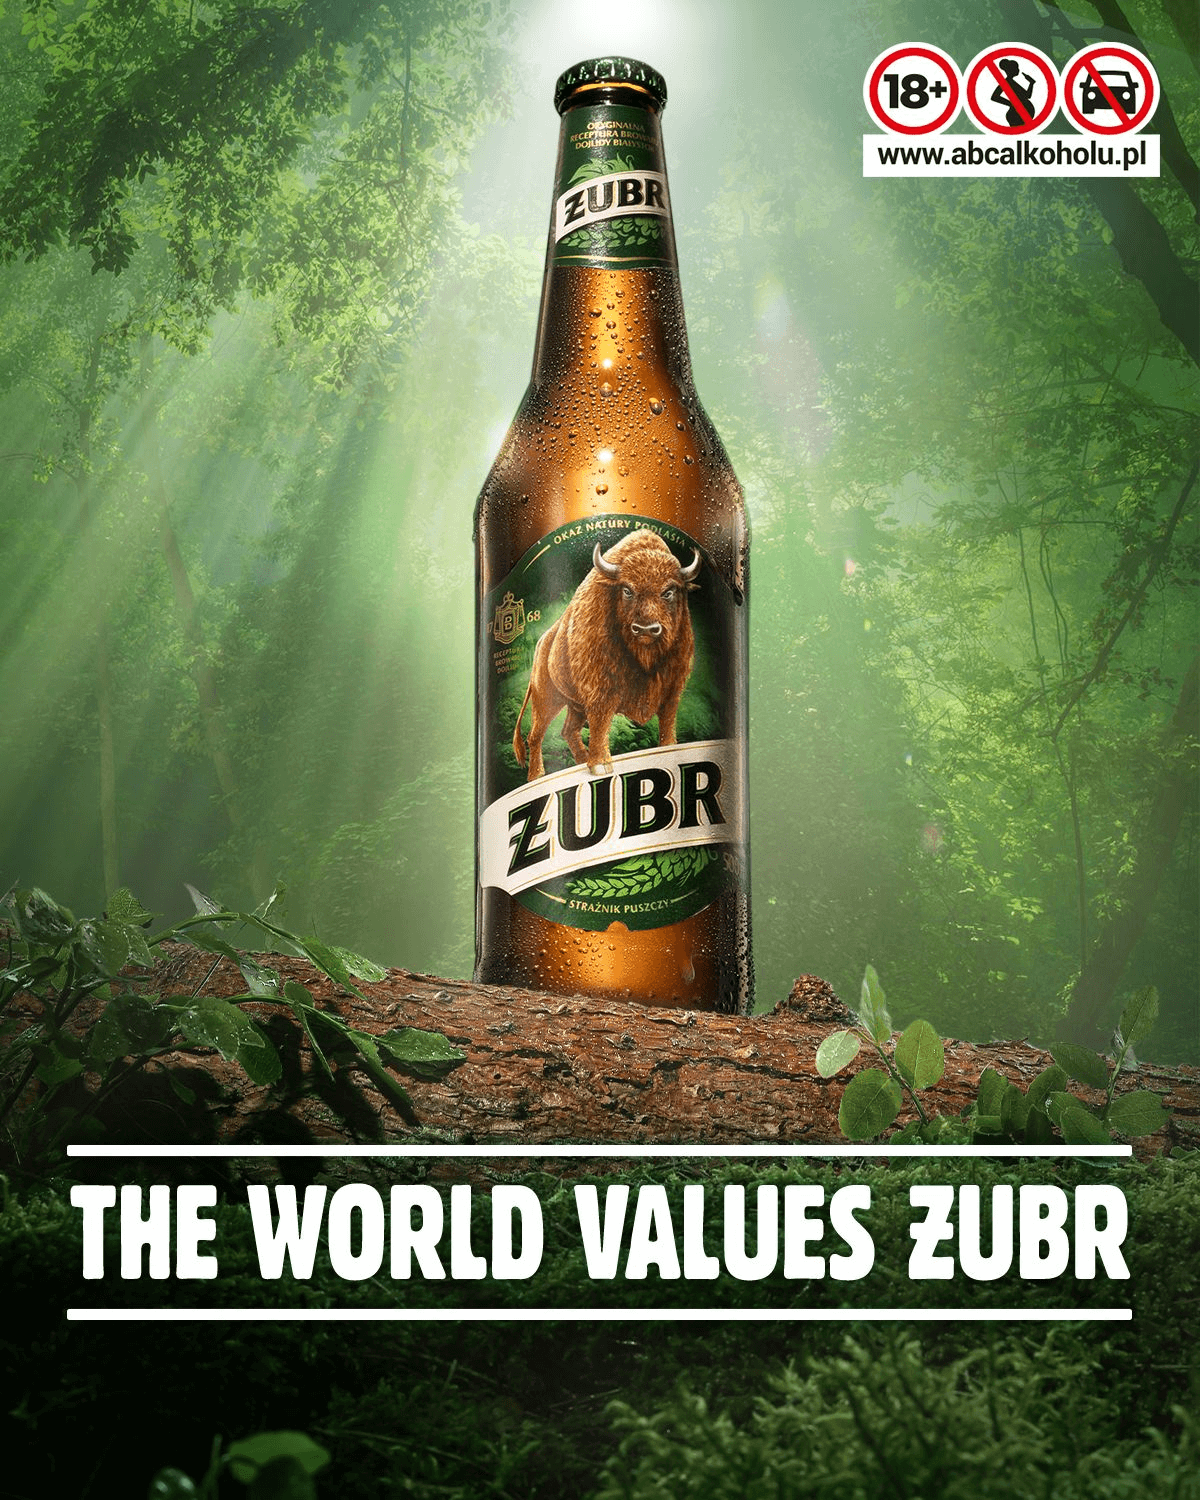 Żubr debuts on list of 50 most valuable beer brands in the world